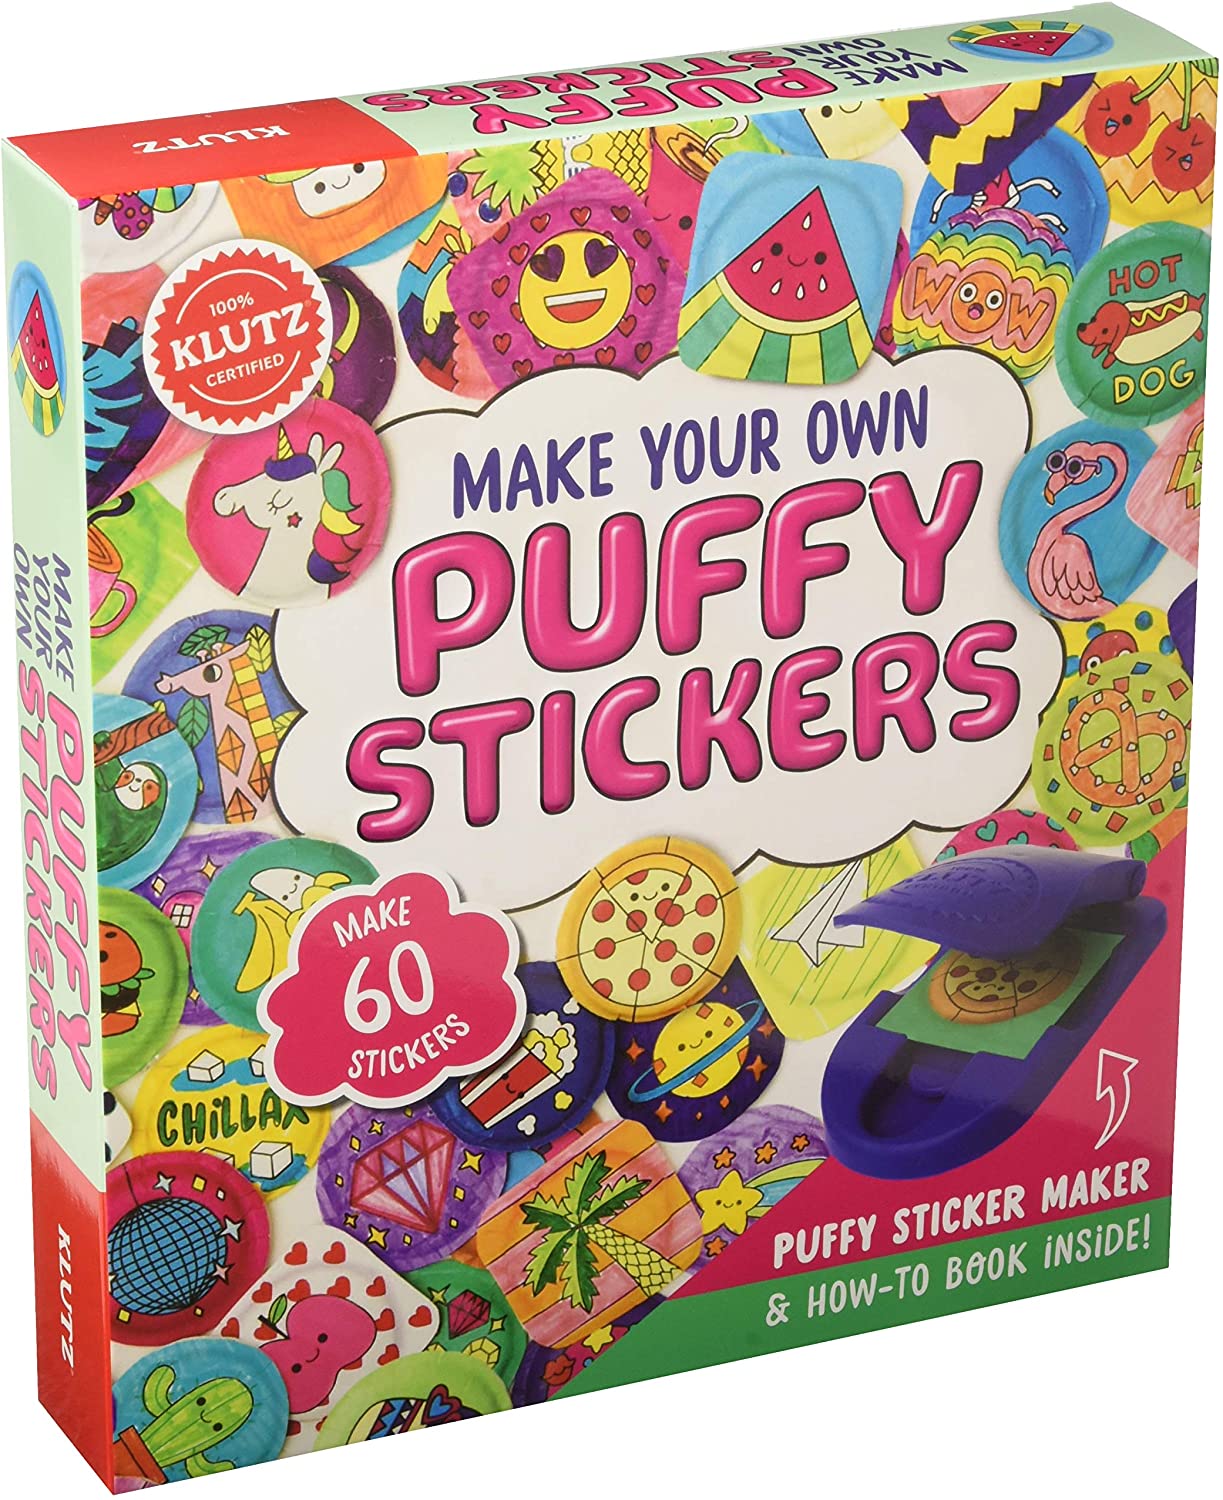 Make Your Own Puffy Stickers by Klutz